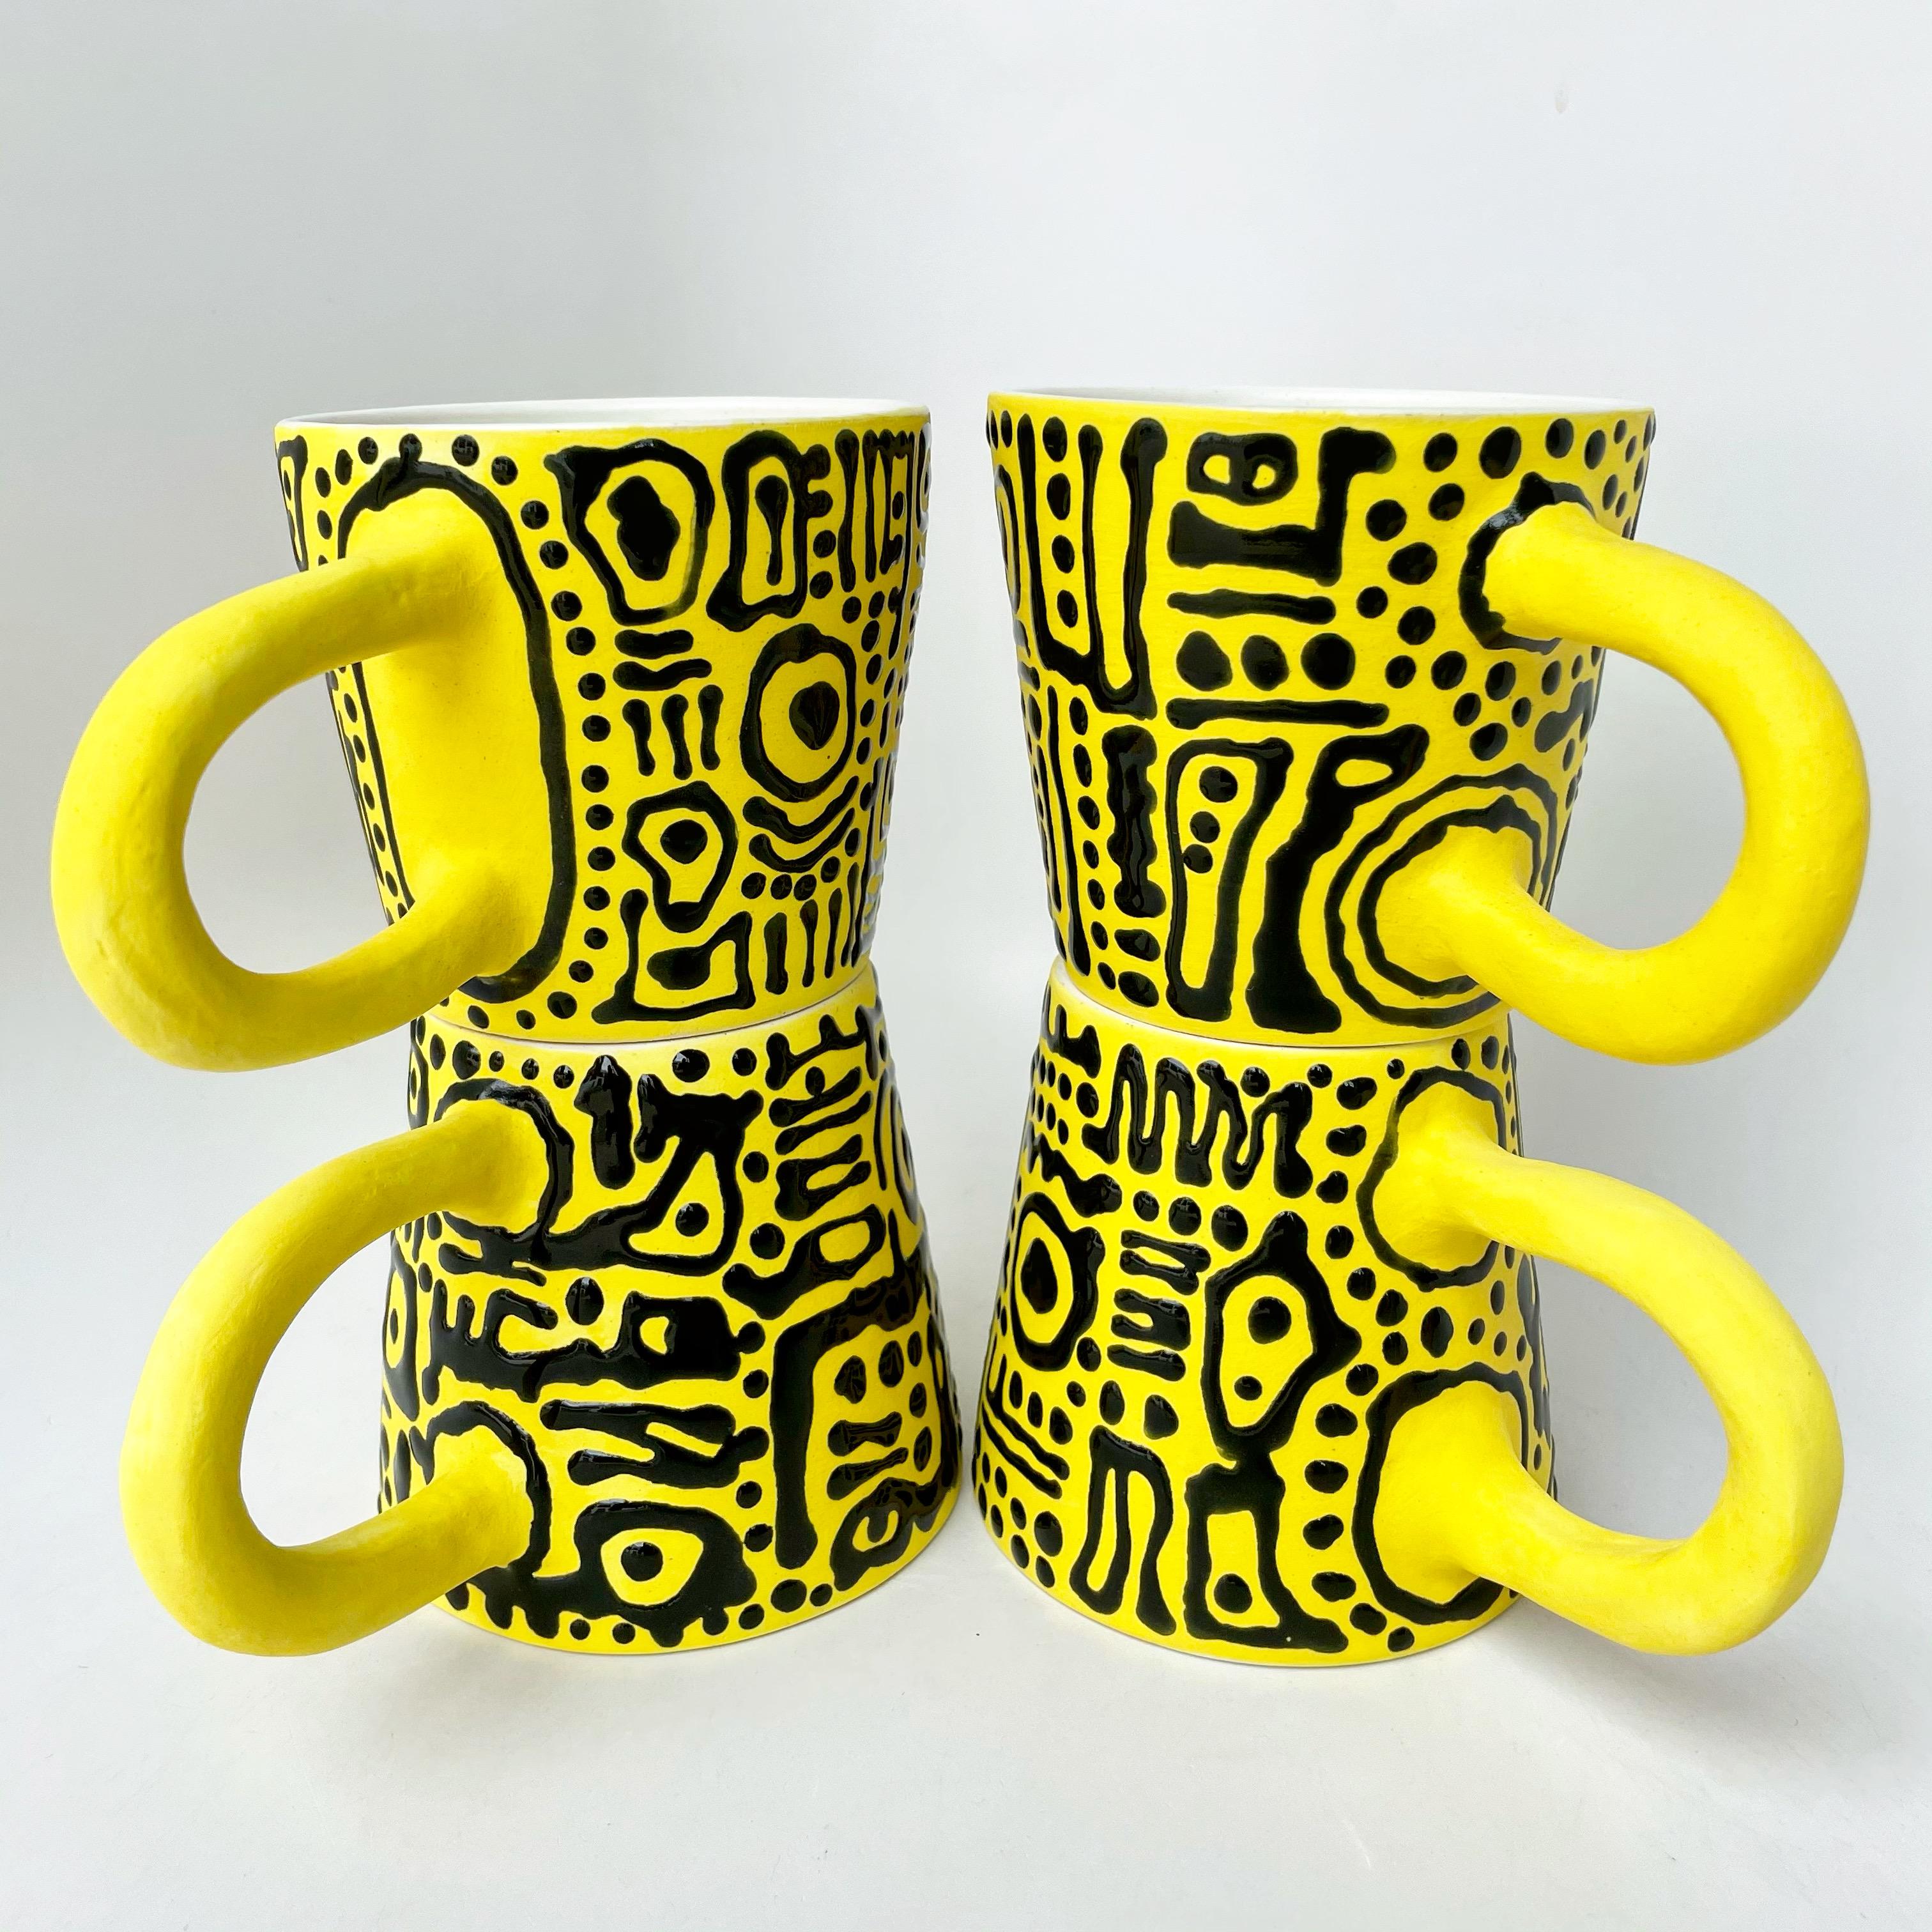 Modern Pop Tribal Tumbler, Handmade and Food Safe, by Artist Stef Duffy For Sale